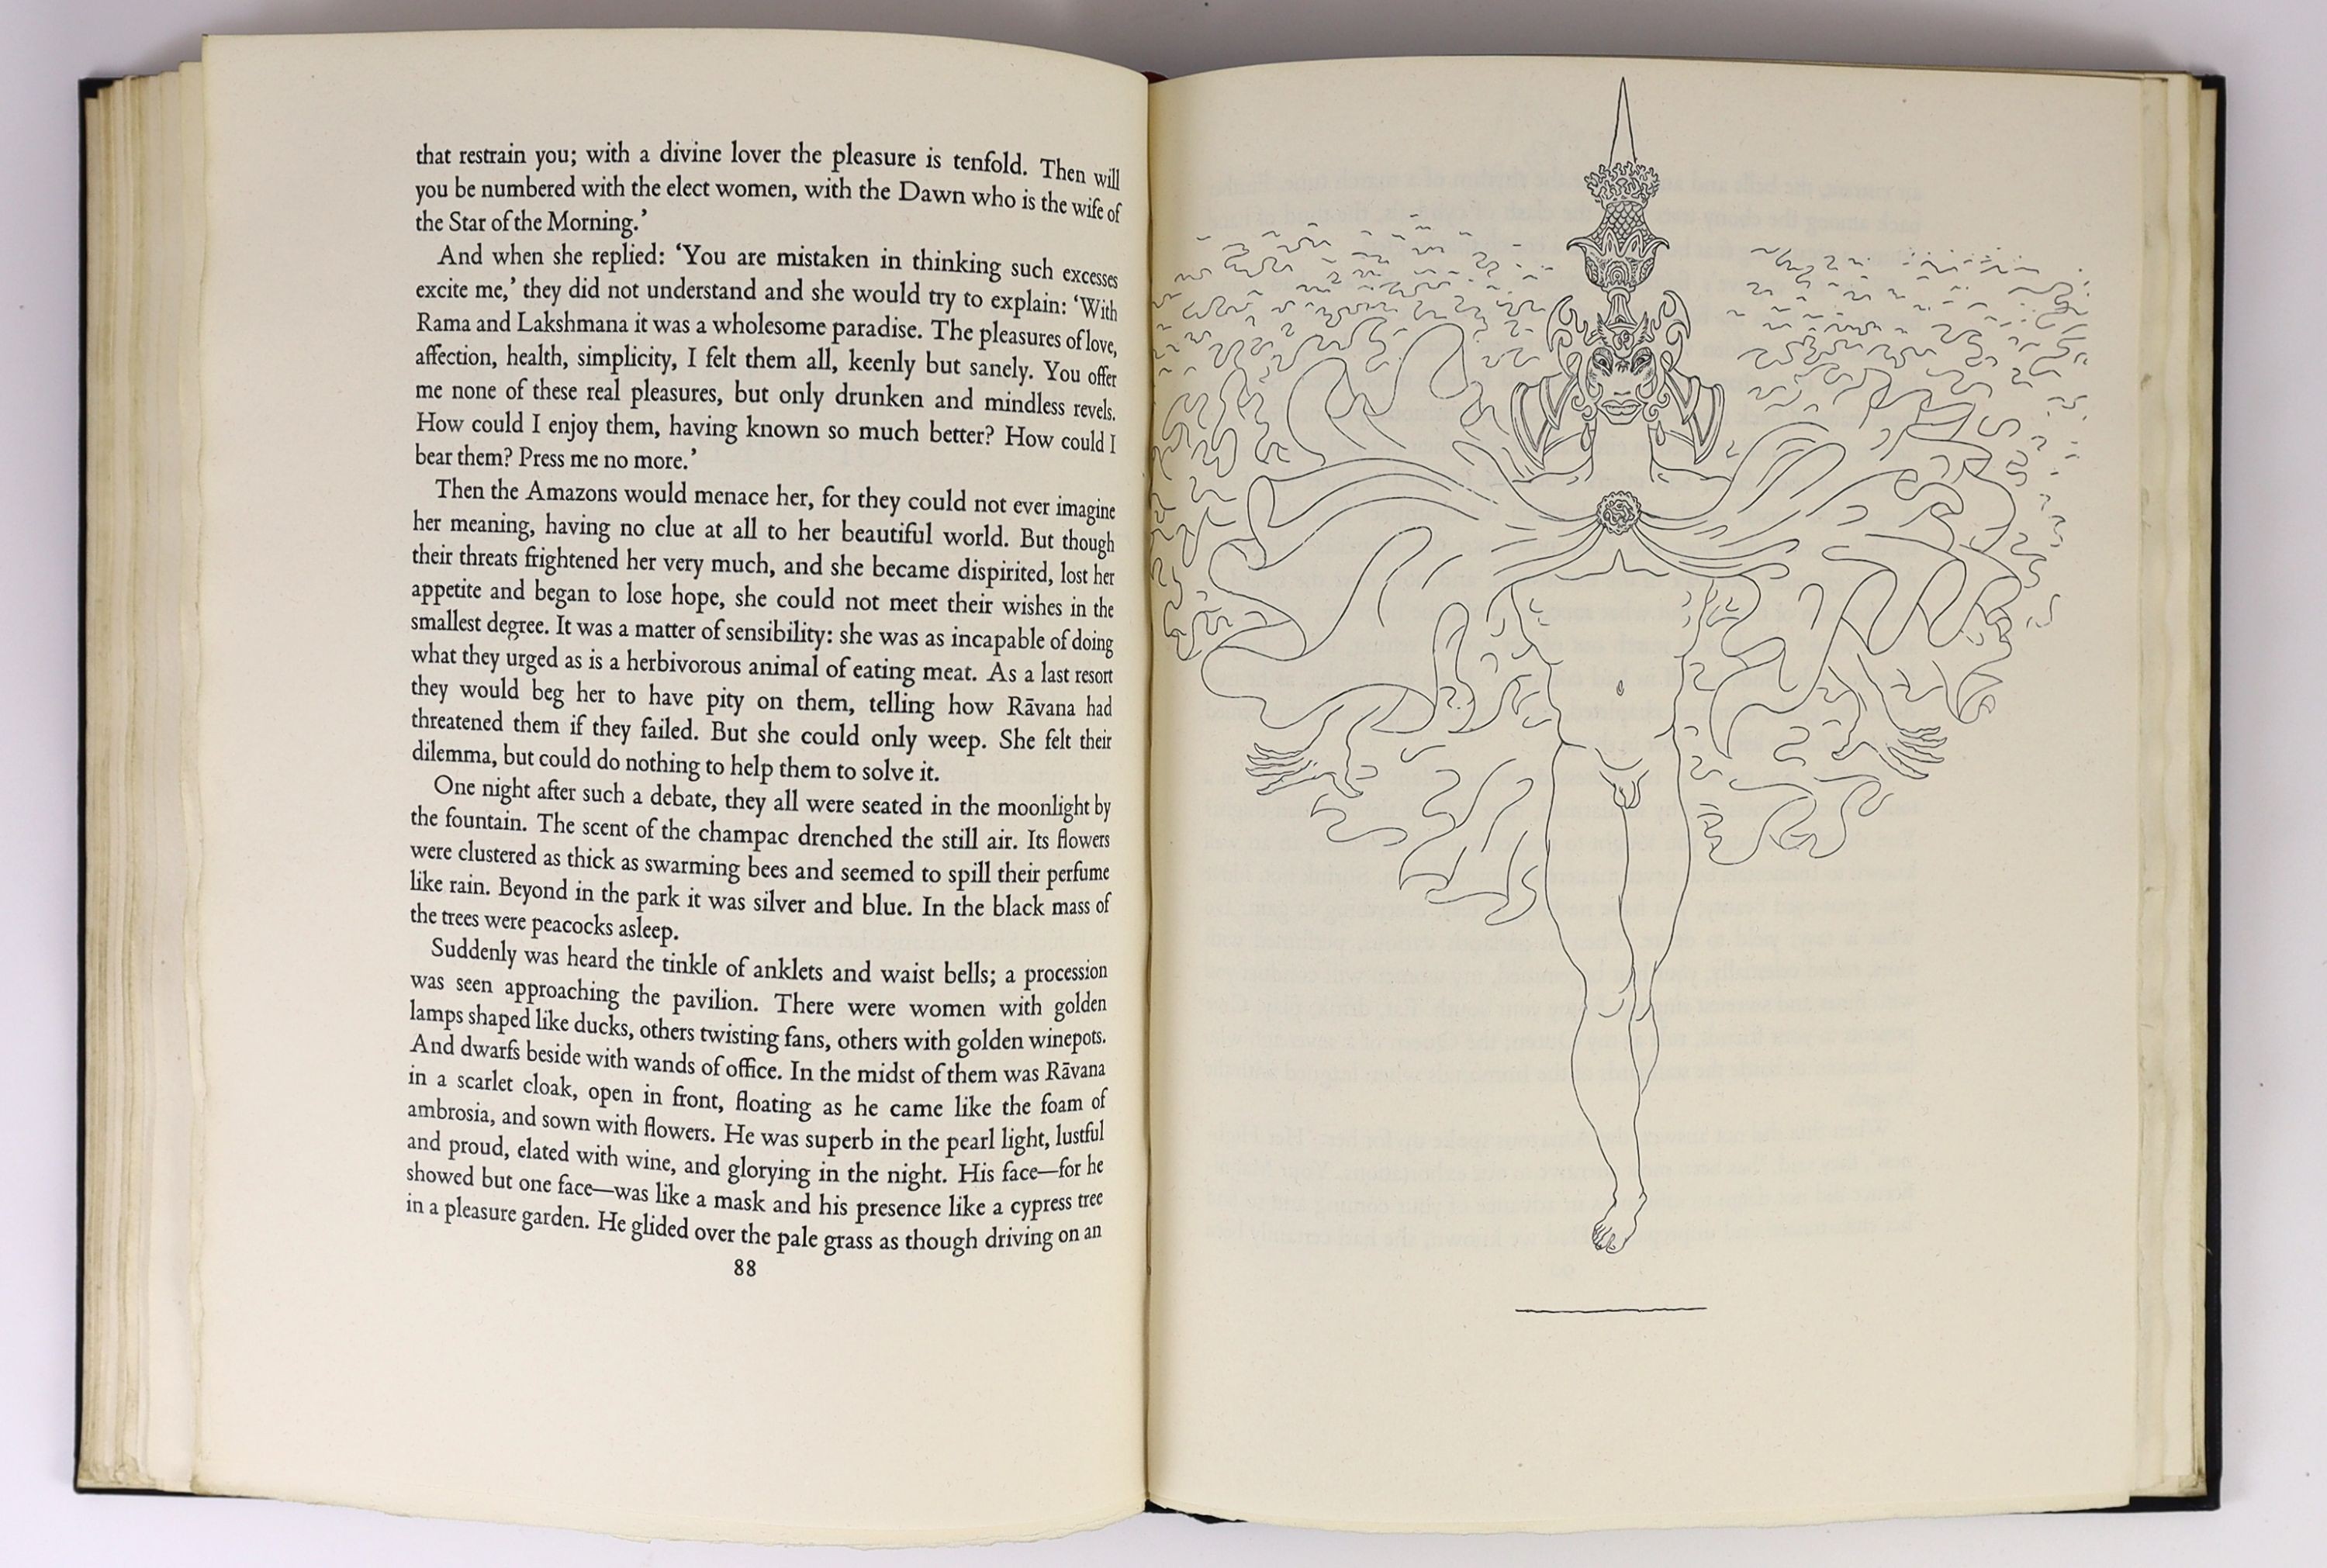 Collins, Maurice - Quest for Sita, one of 500, illustrated by Mervyn Peake, 4to, buckram, Faber & Faber, London, 1946